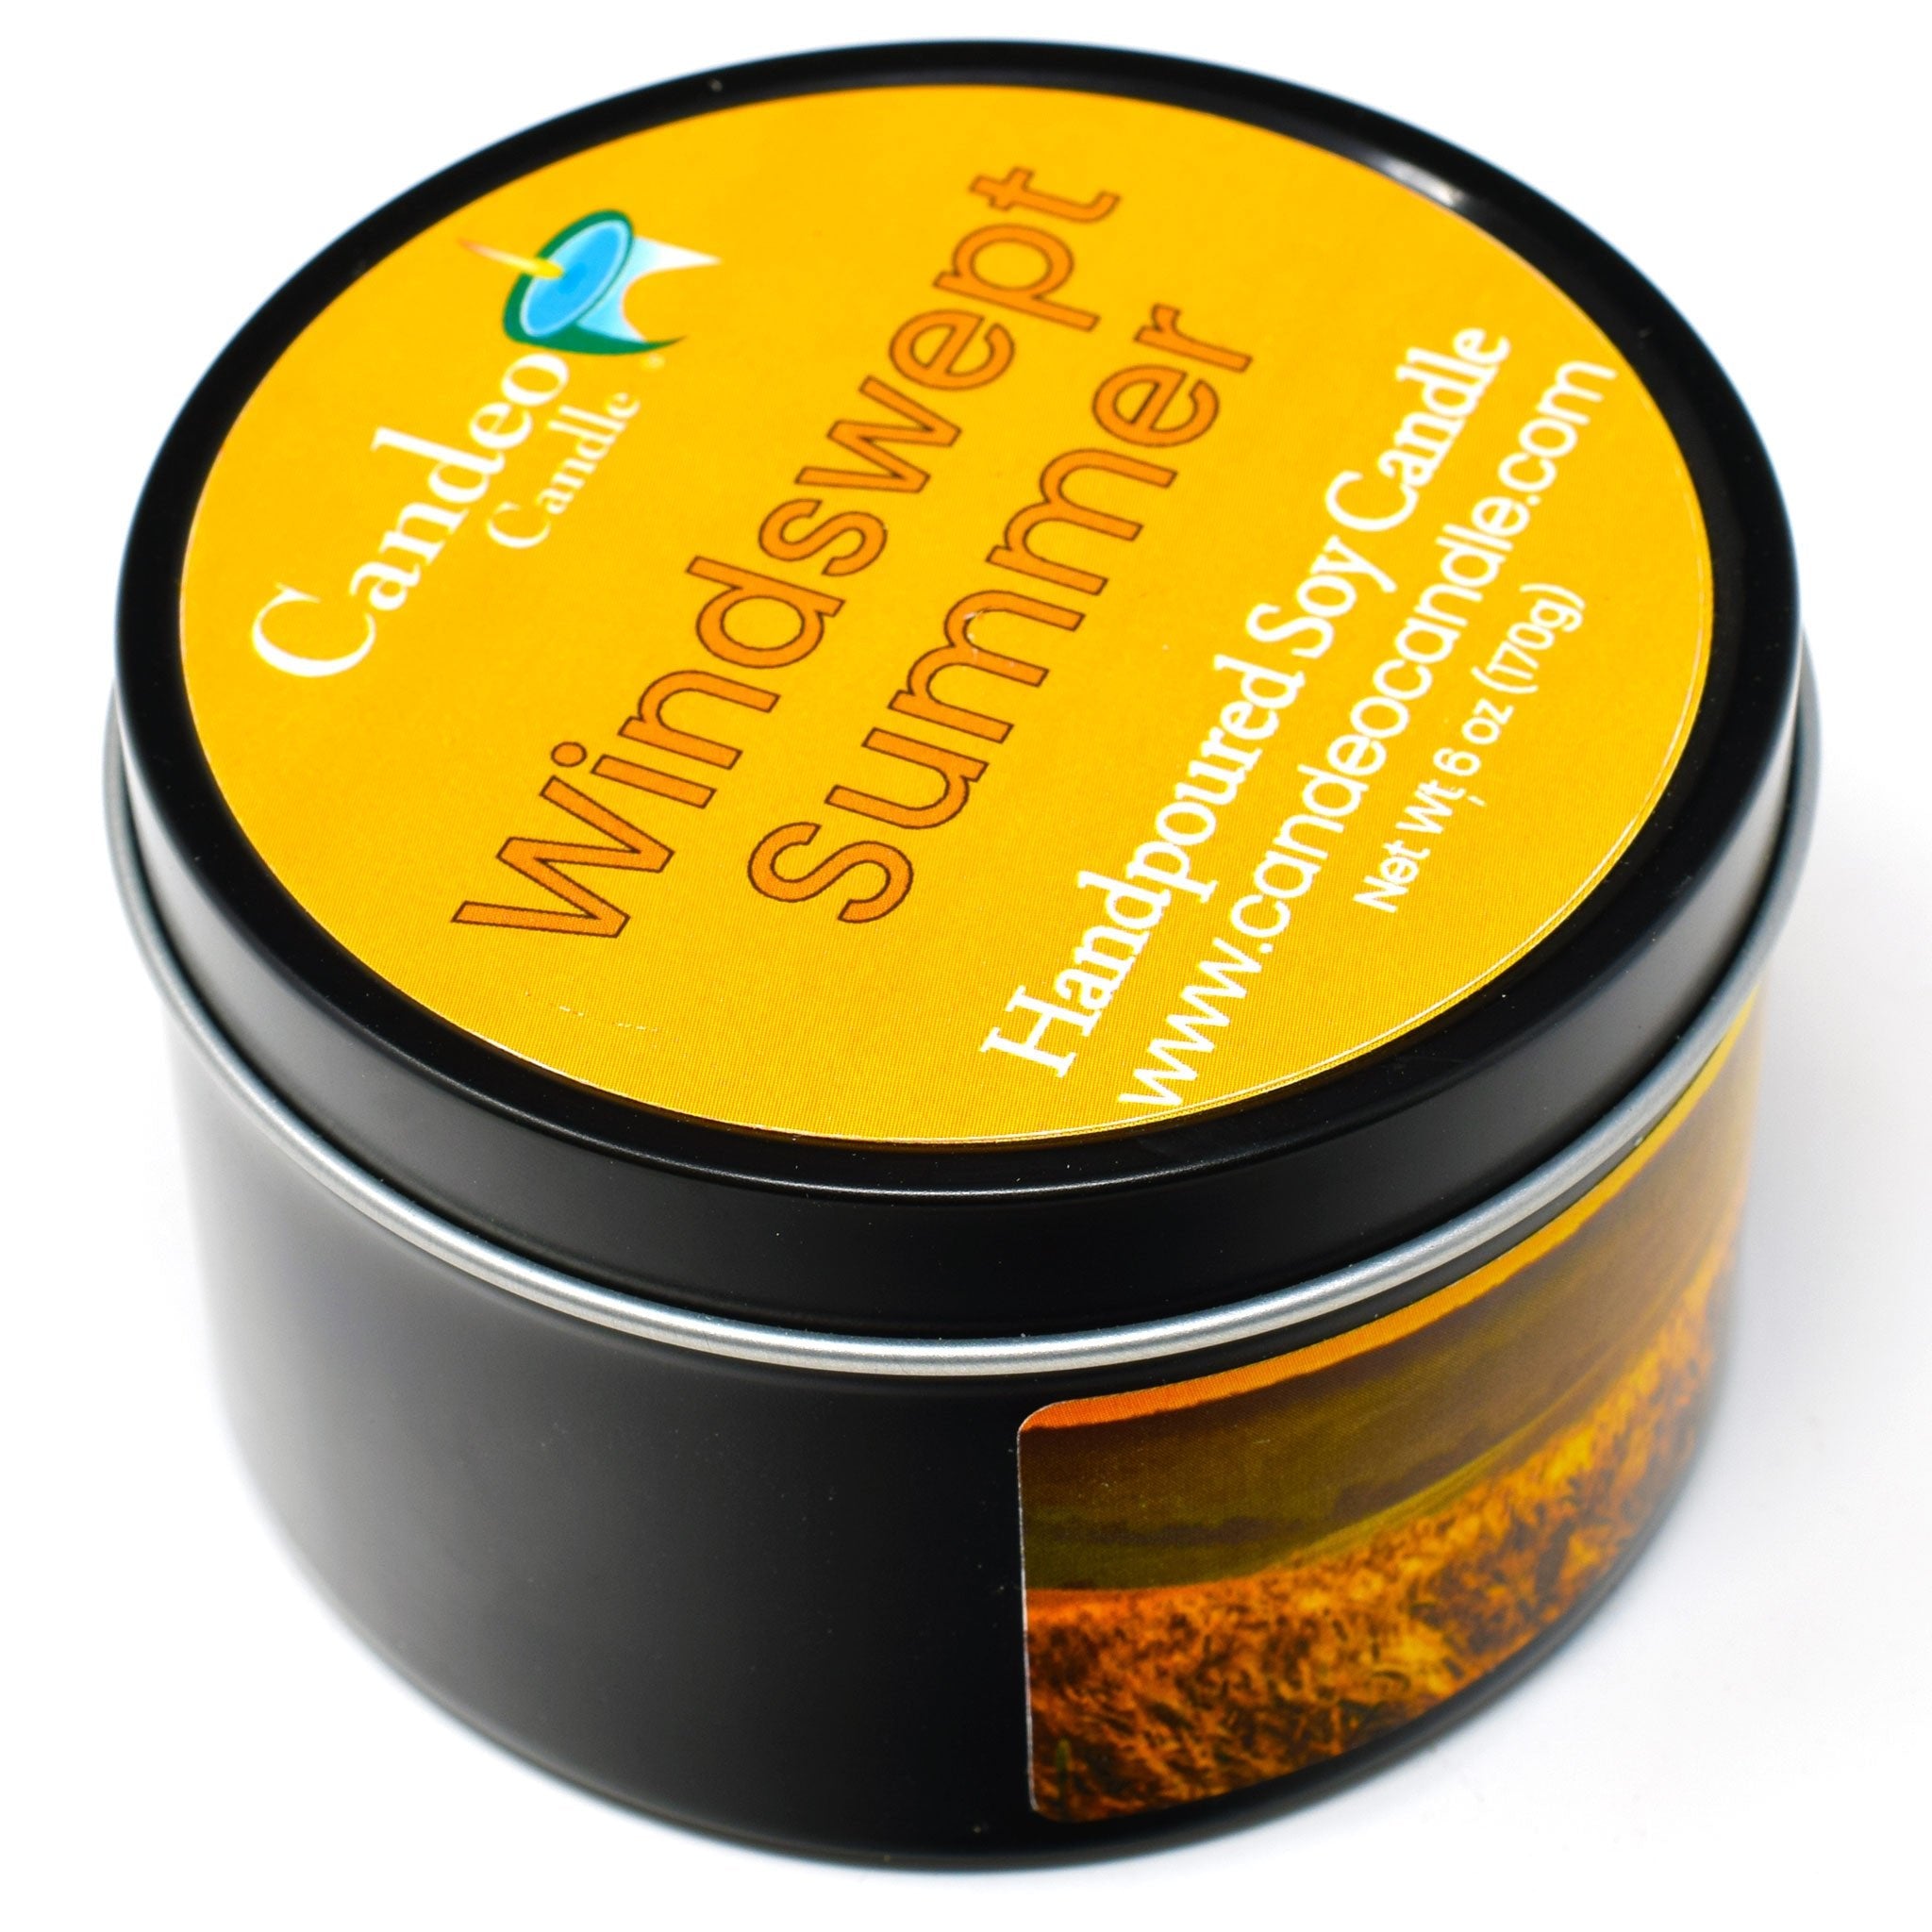 Windswept Summer, 6oz Soy Candle Tin - Candeo Candle